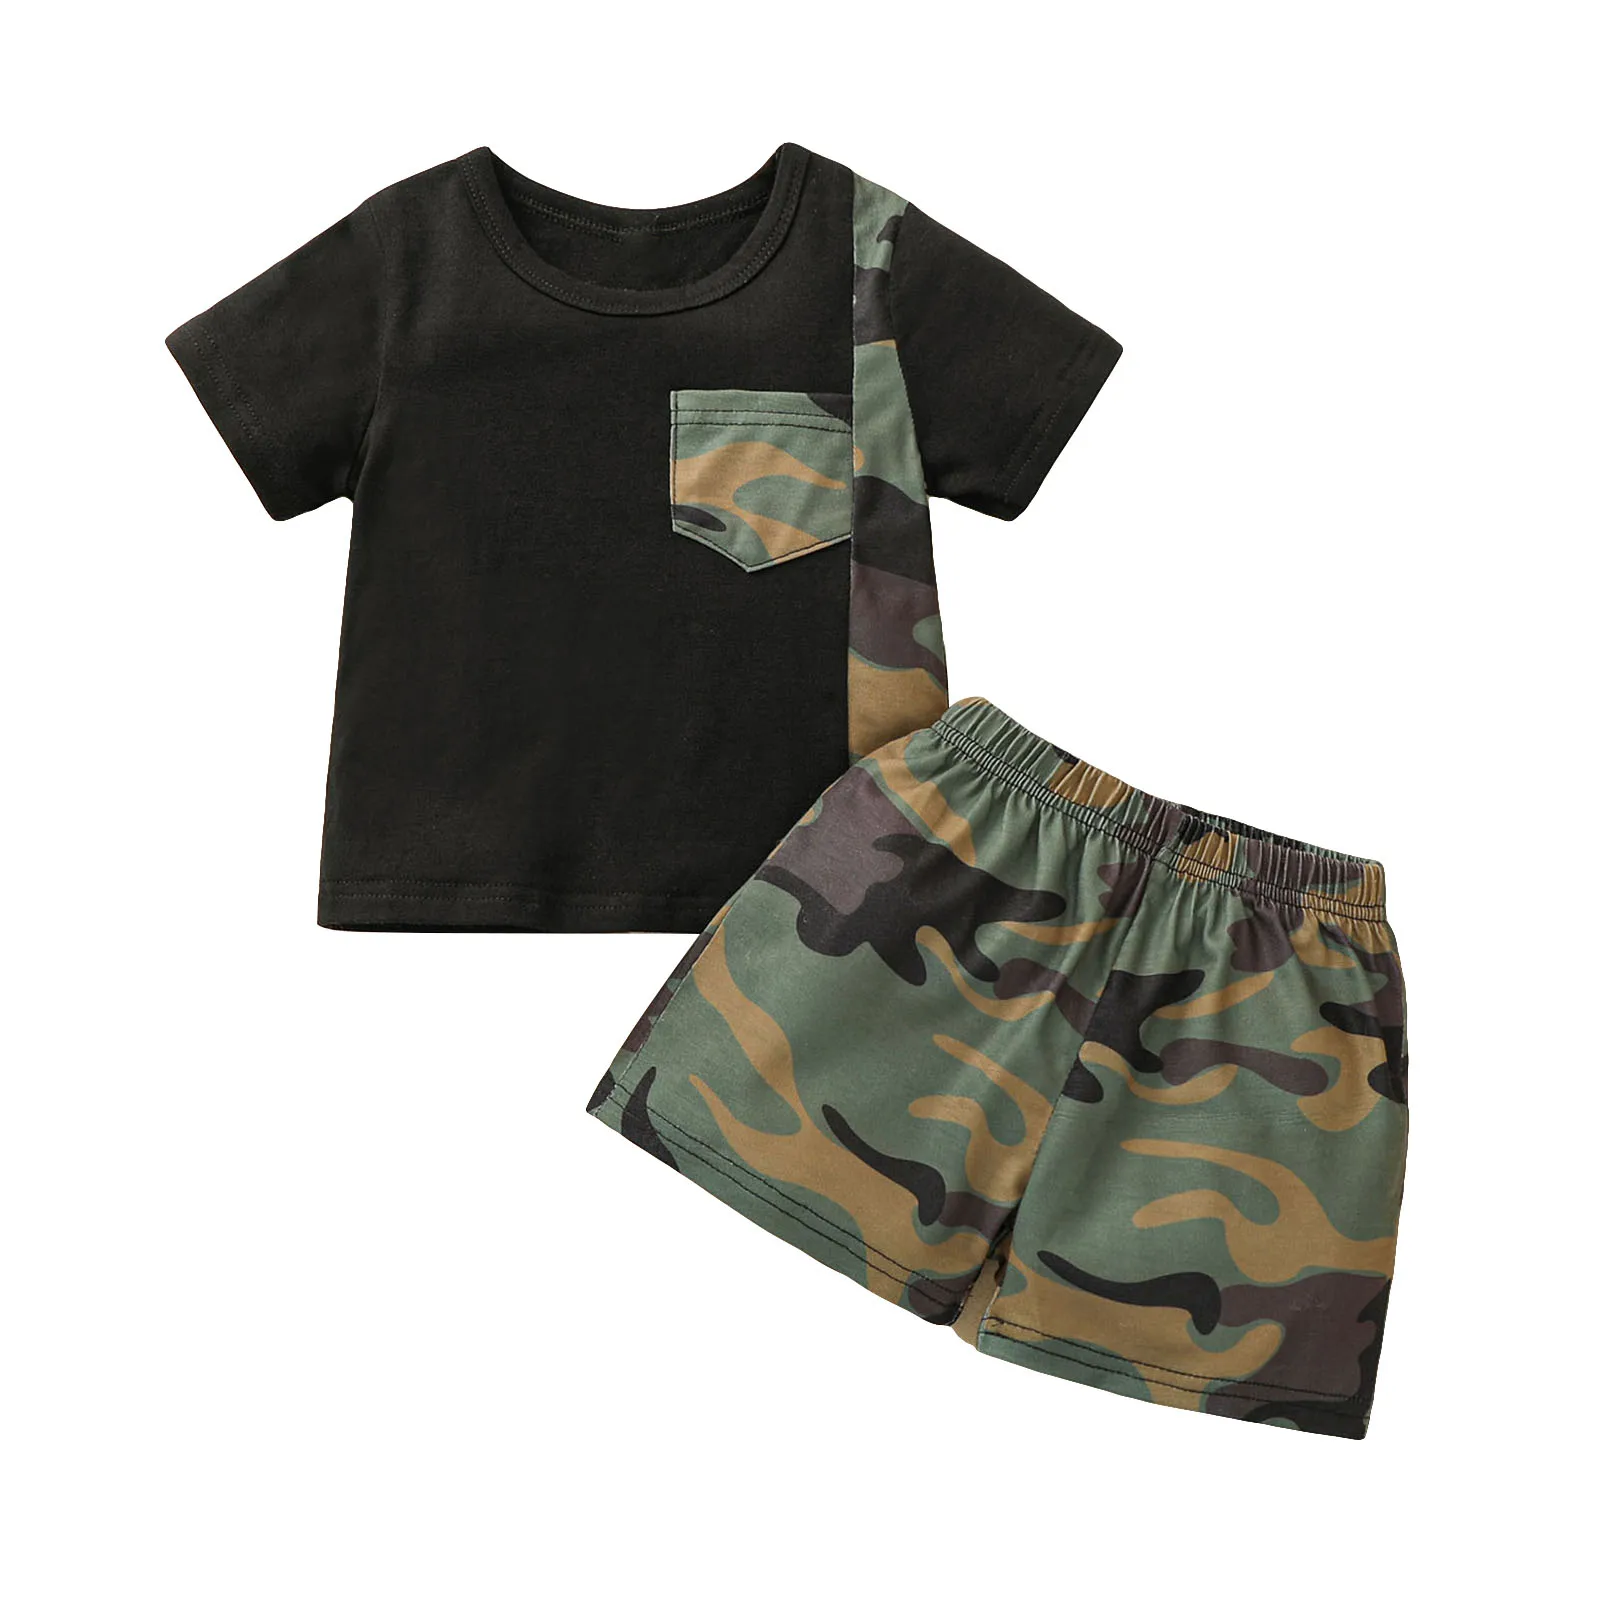 

2Pcs Toddler Baby Boys Summer Tracksuit Splicing O-Neck Short Sleeves T-Shirt + Camouflage Shorts for Kids 3 Months to 3 Years